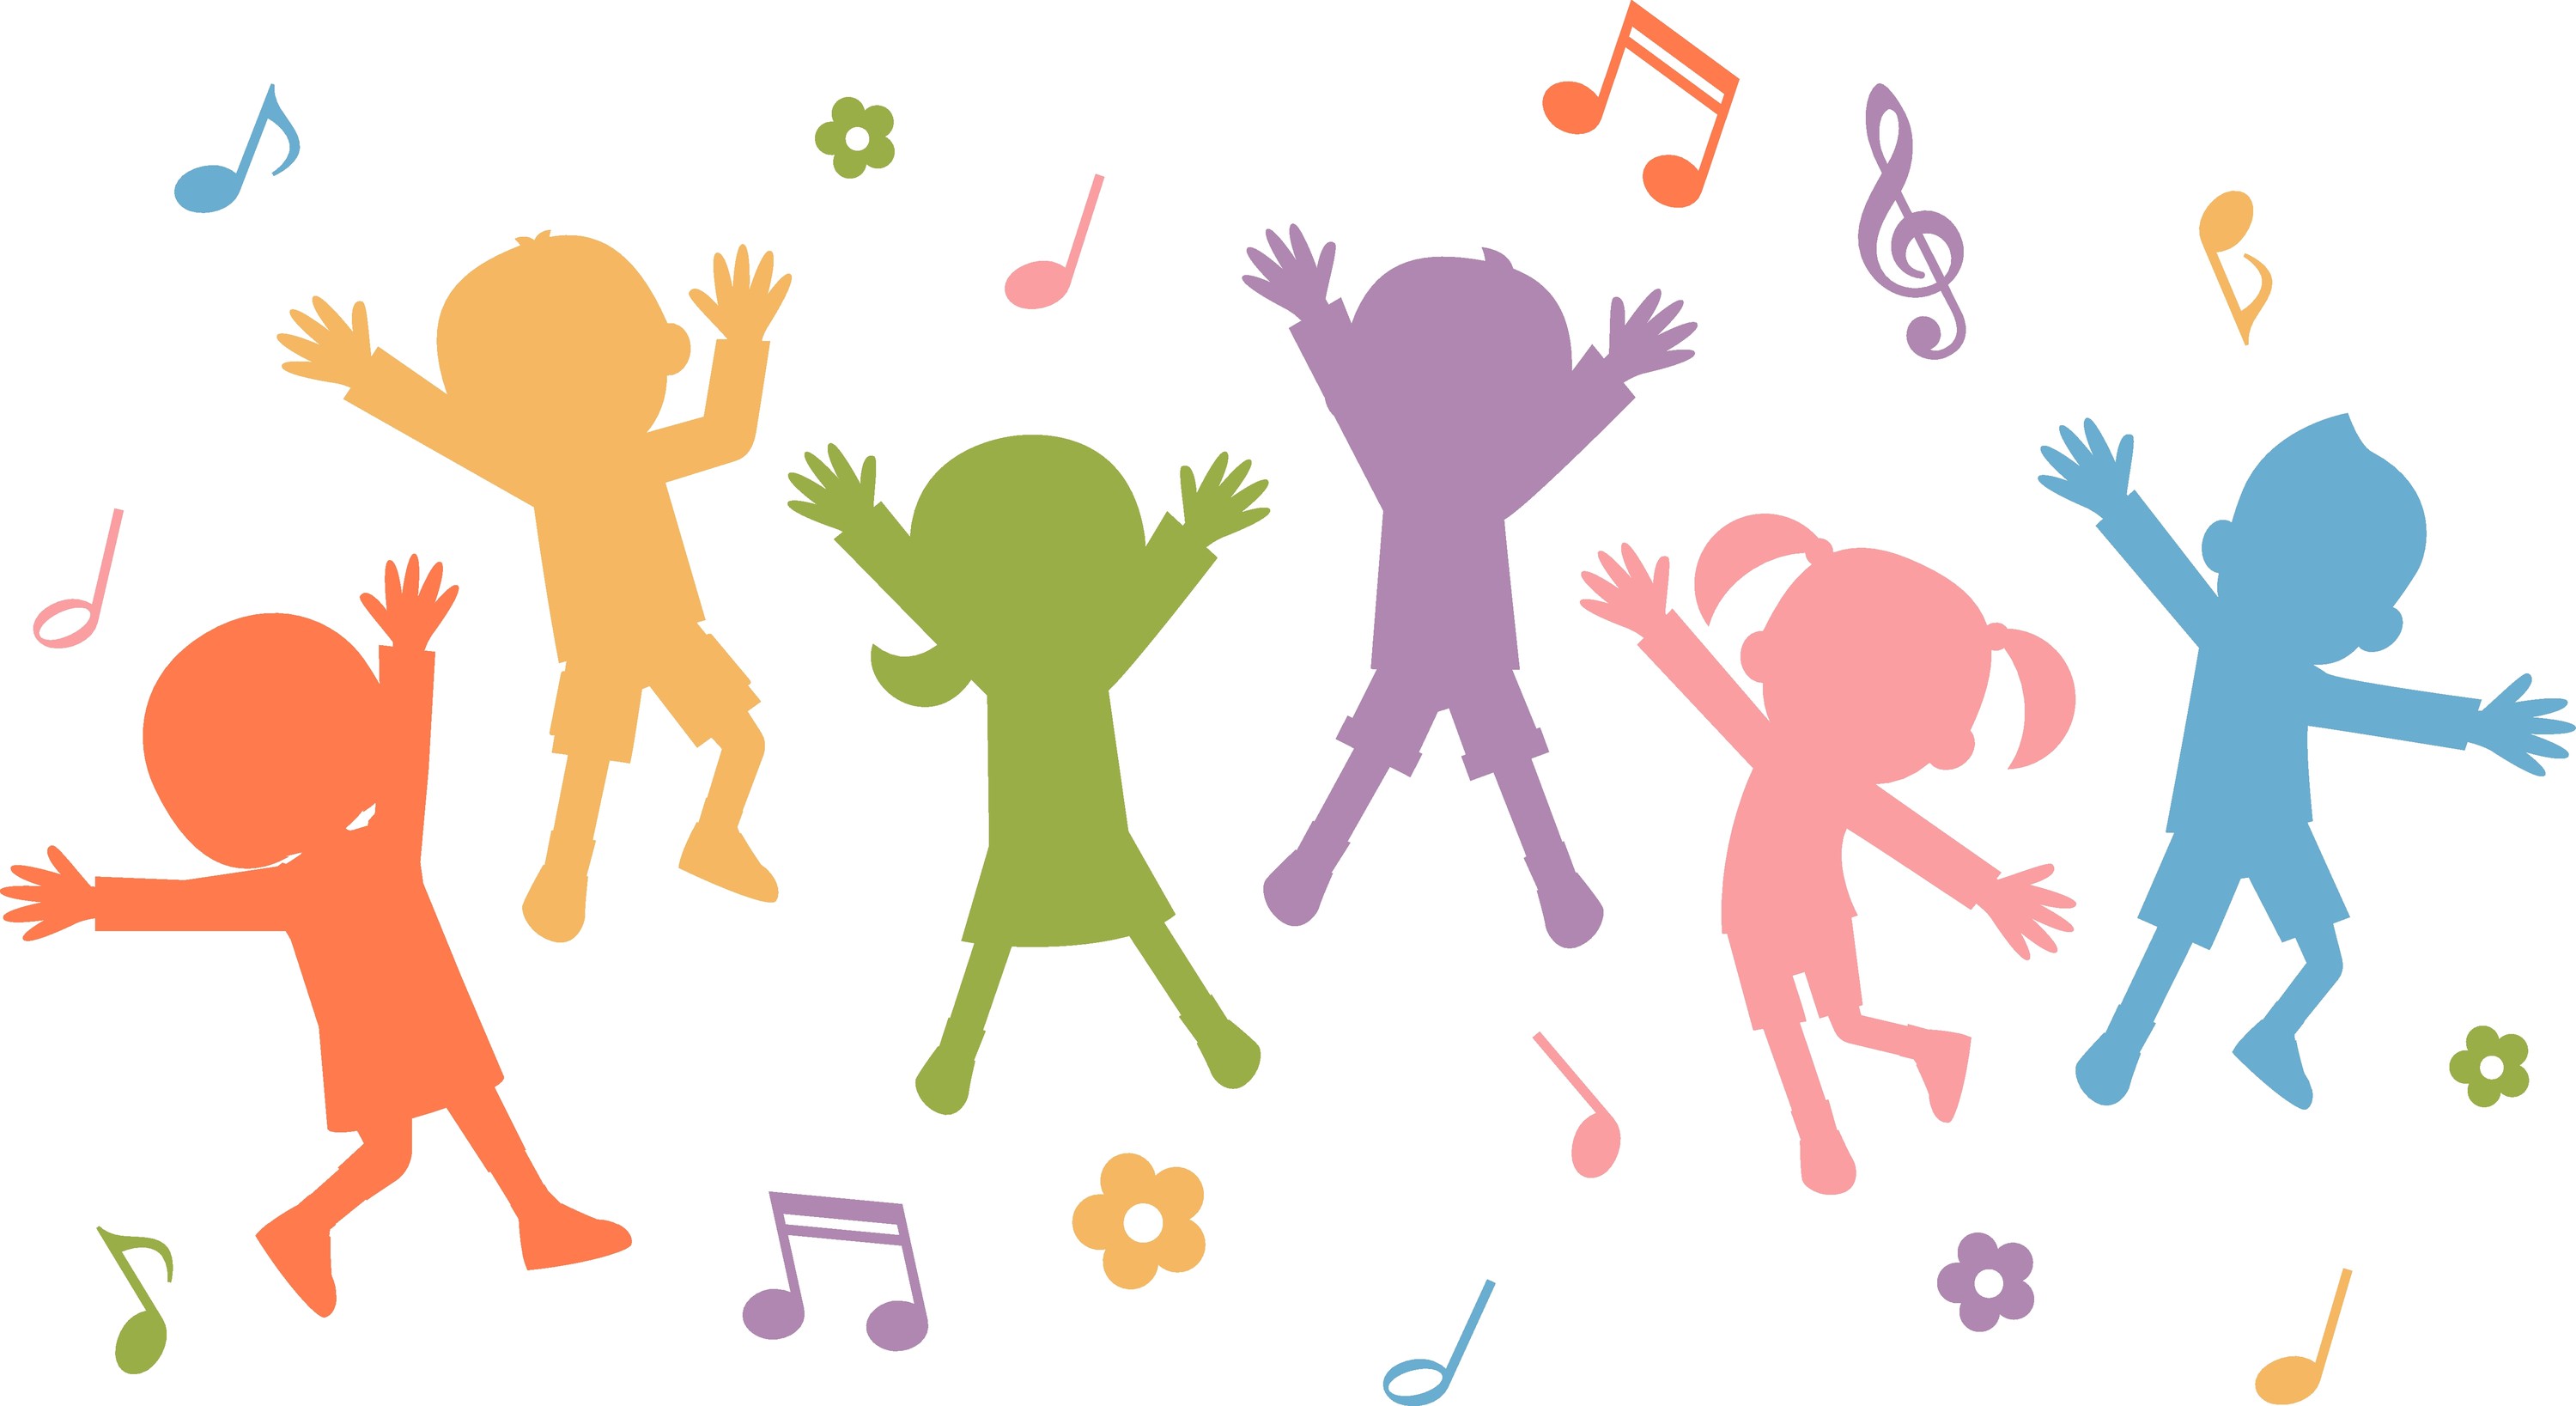 Clip art picture of children's silhouettes in various colors, dancing. Colorful music notes surround the children. 